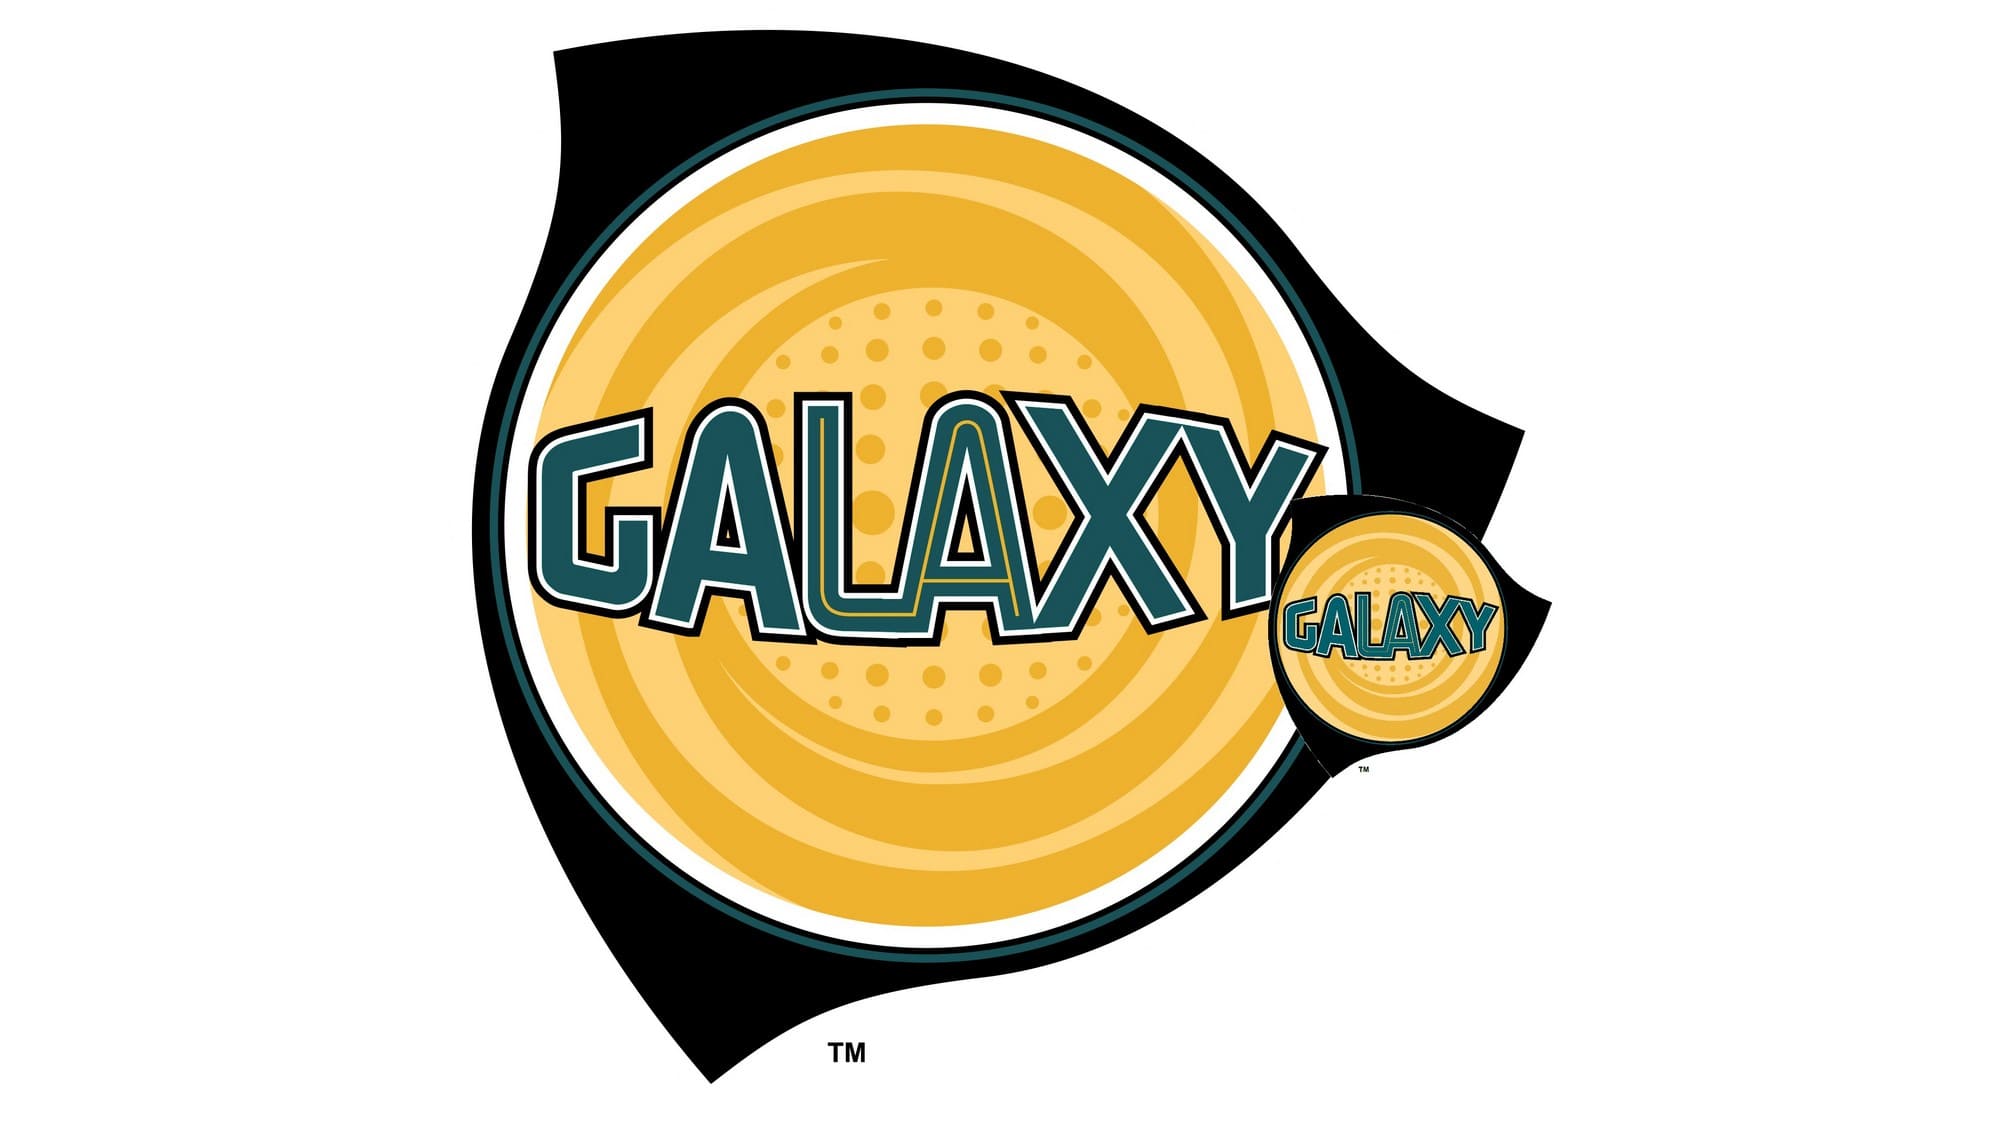 LV logo with the theme of galaxy speed and style that is suitable